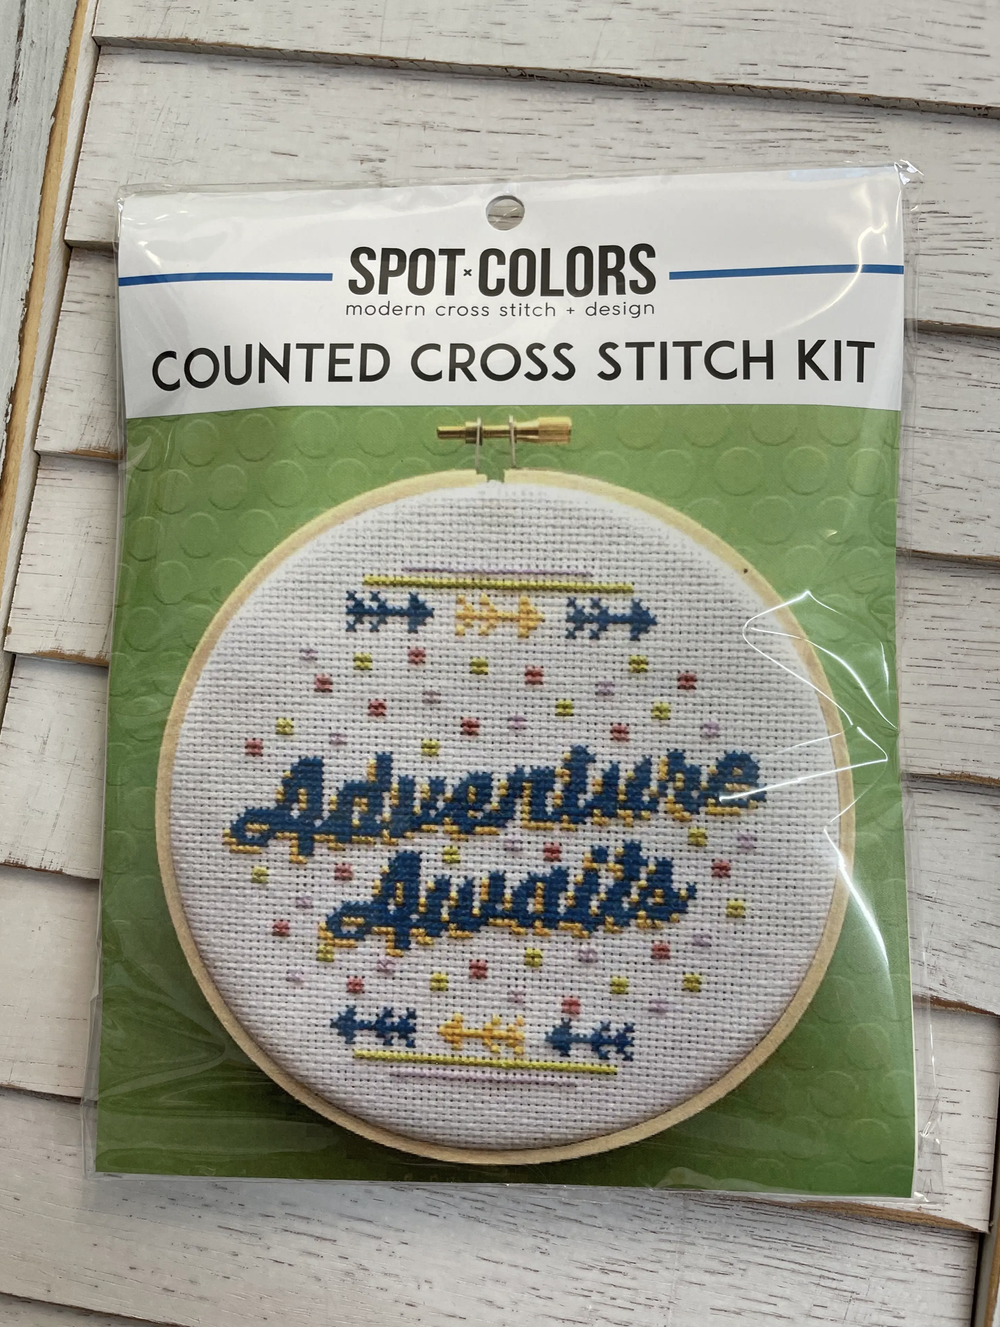  LWZAYS Cross Stitch Kits Counted Cross Stitch Kits 6 Pack  Stamped Cross-Stitch Needlepoint Counted Kits Beginners,Embroidery Kit Arts  and Crafts for Home Decor(11CT Cartoon) : Arts, Crafts & Sewing